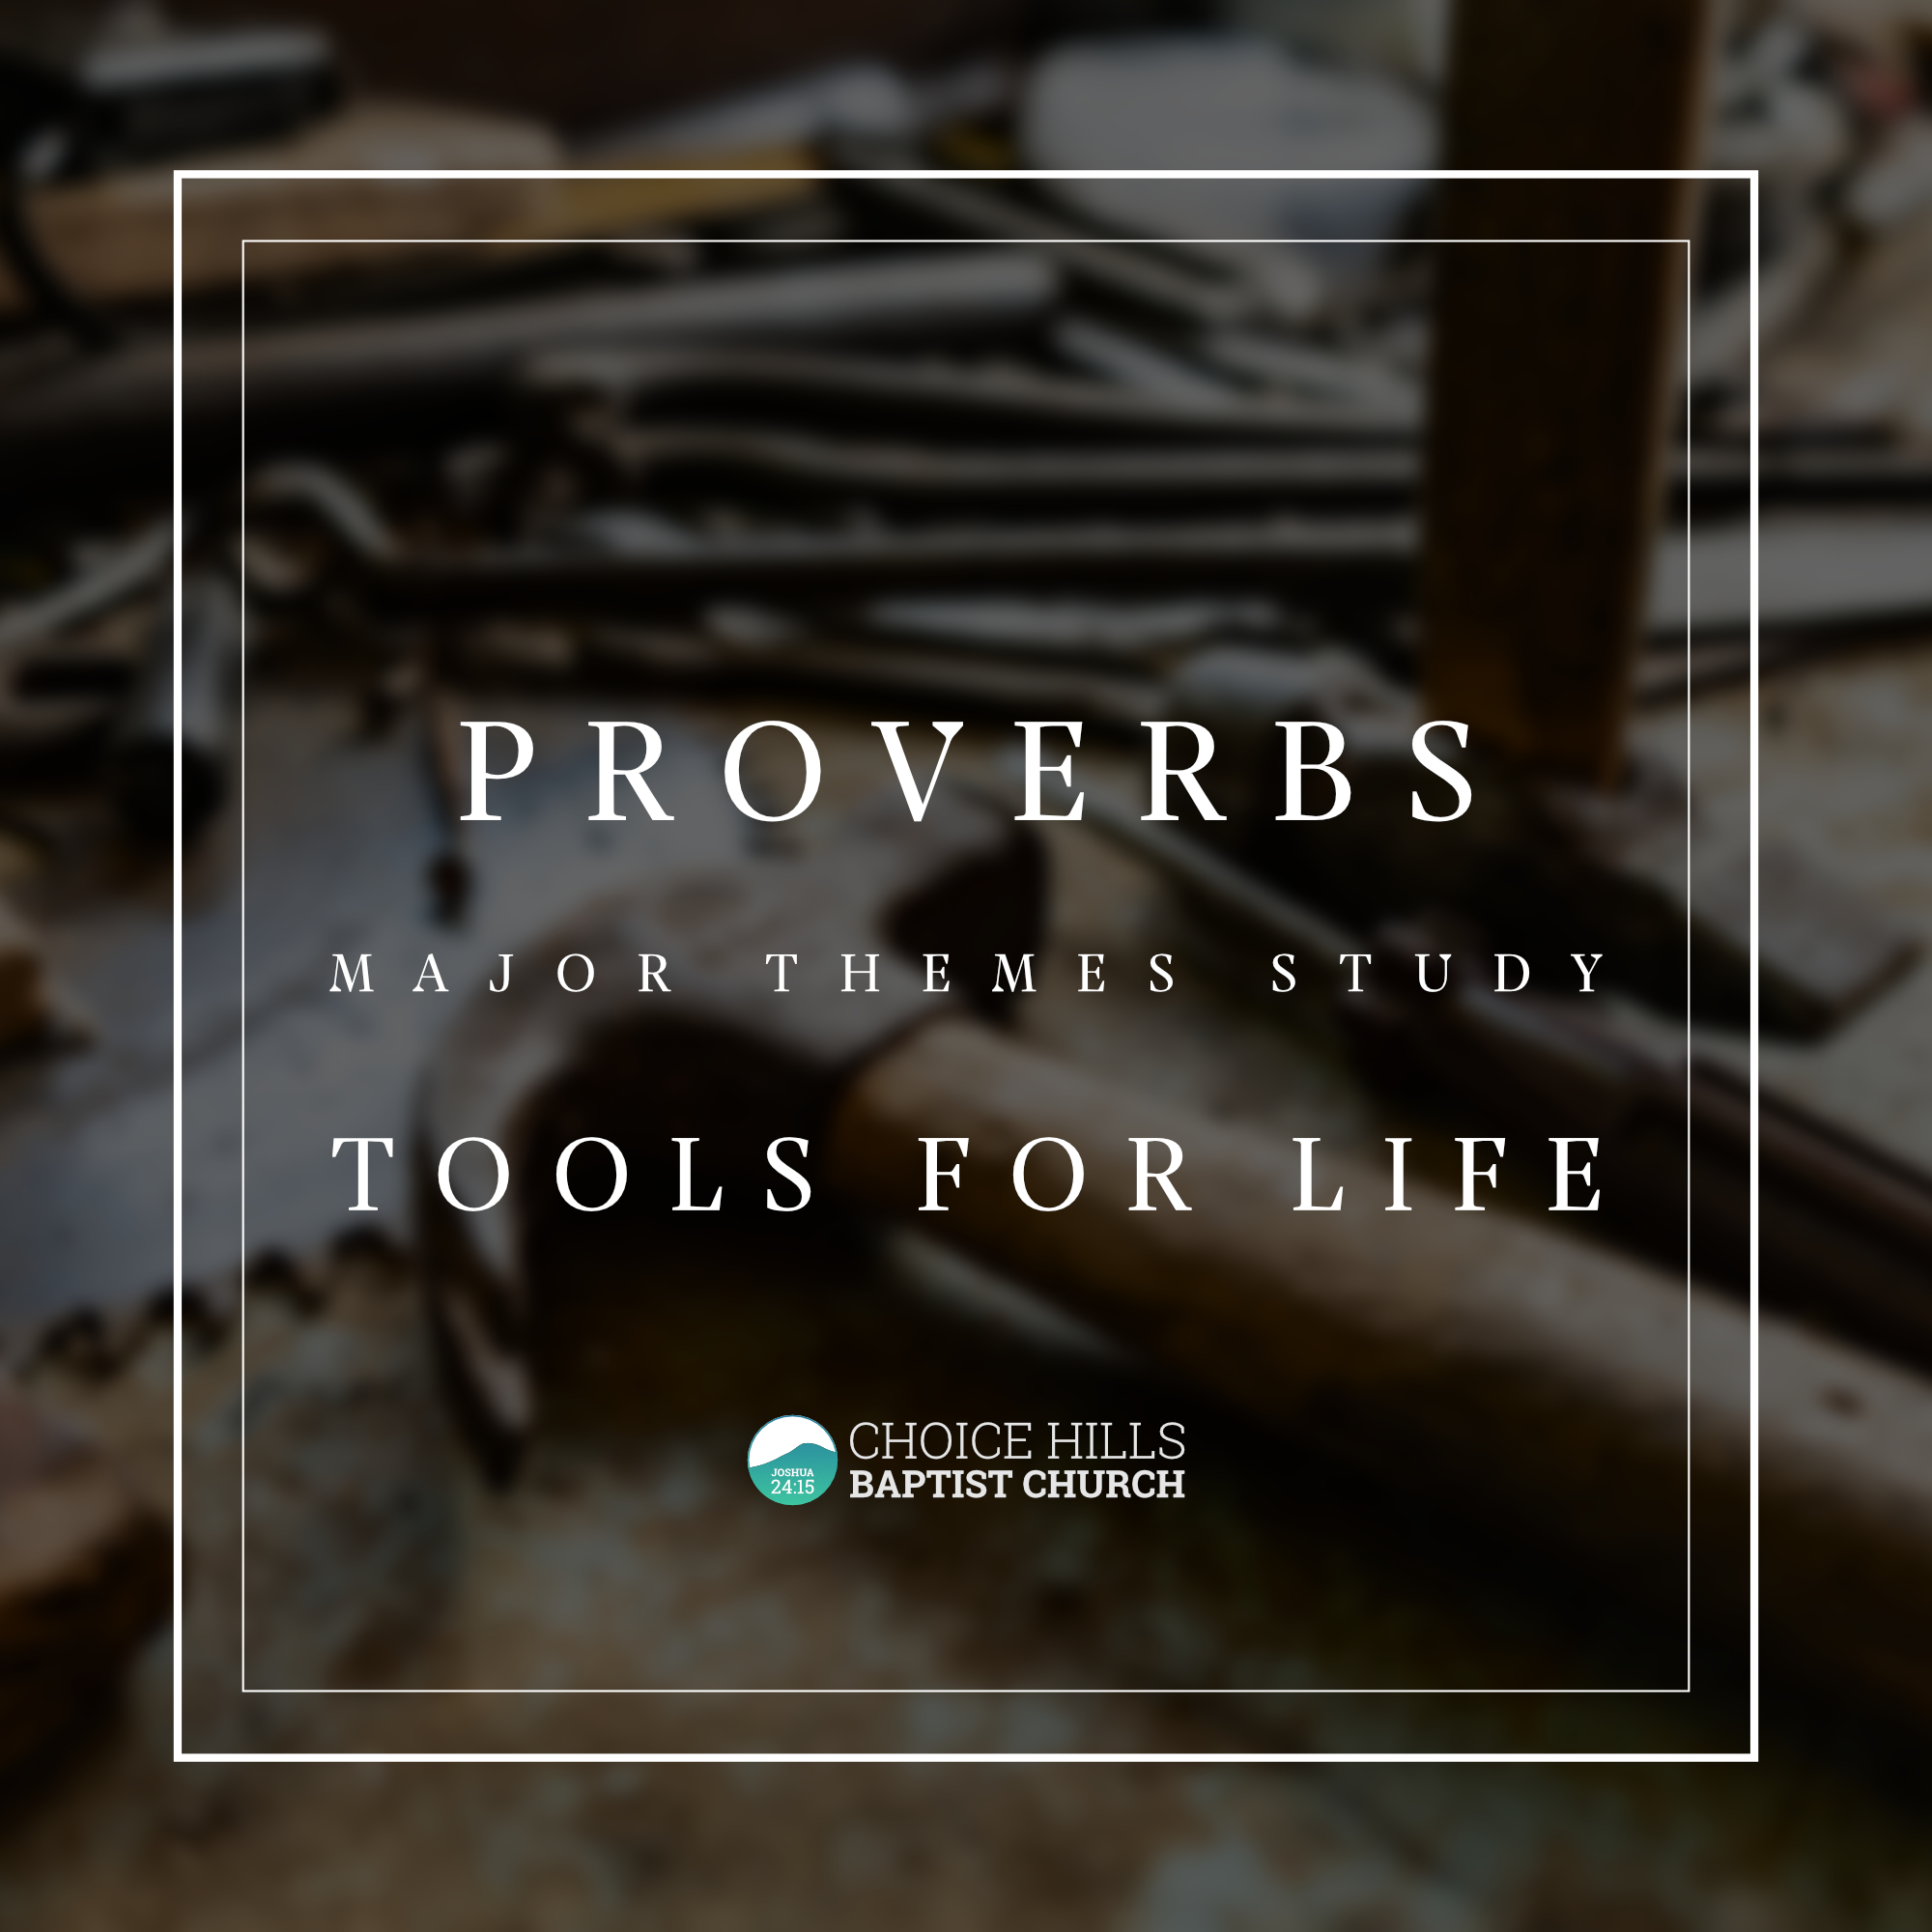 Women in Proverbs (Part 5): The Odious Woman